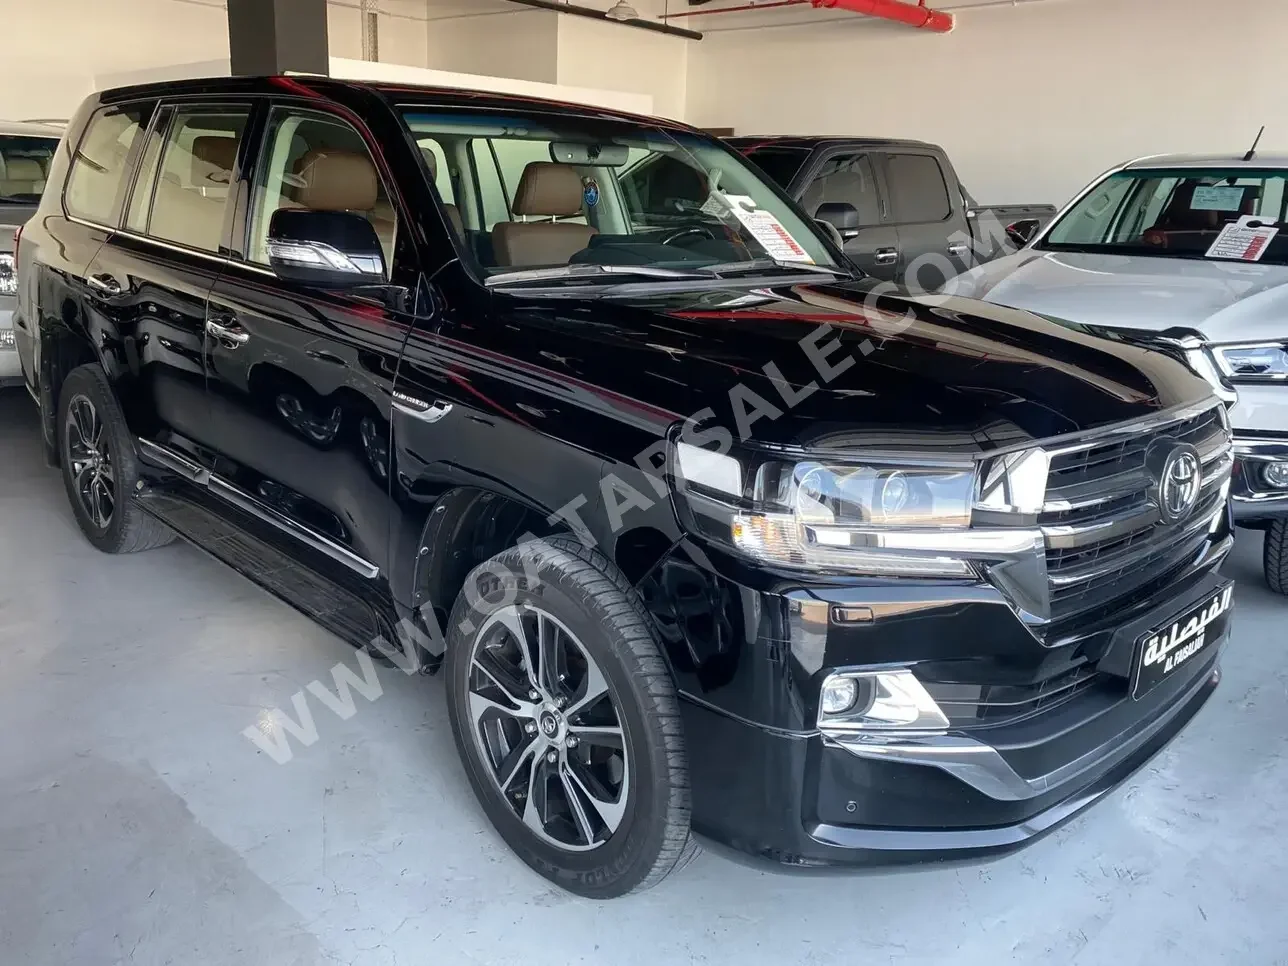 Toyota  Land Cruiser  GXR- Grand Touring  2020  Automatic  118,000 Km  8 Cylinder  Four Wheel Drive (4WD)  SUV  Black